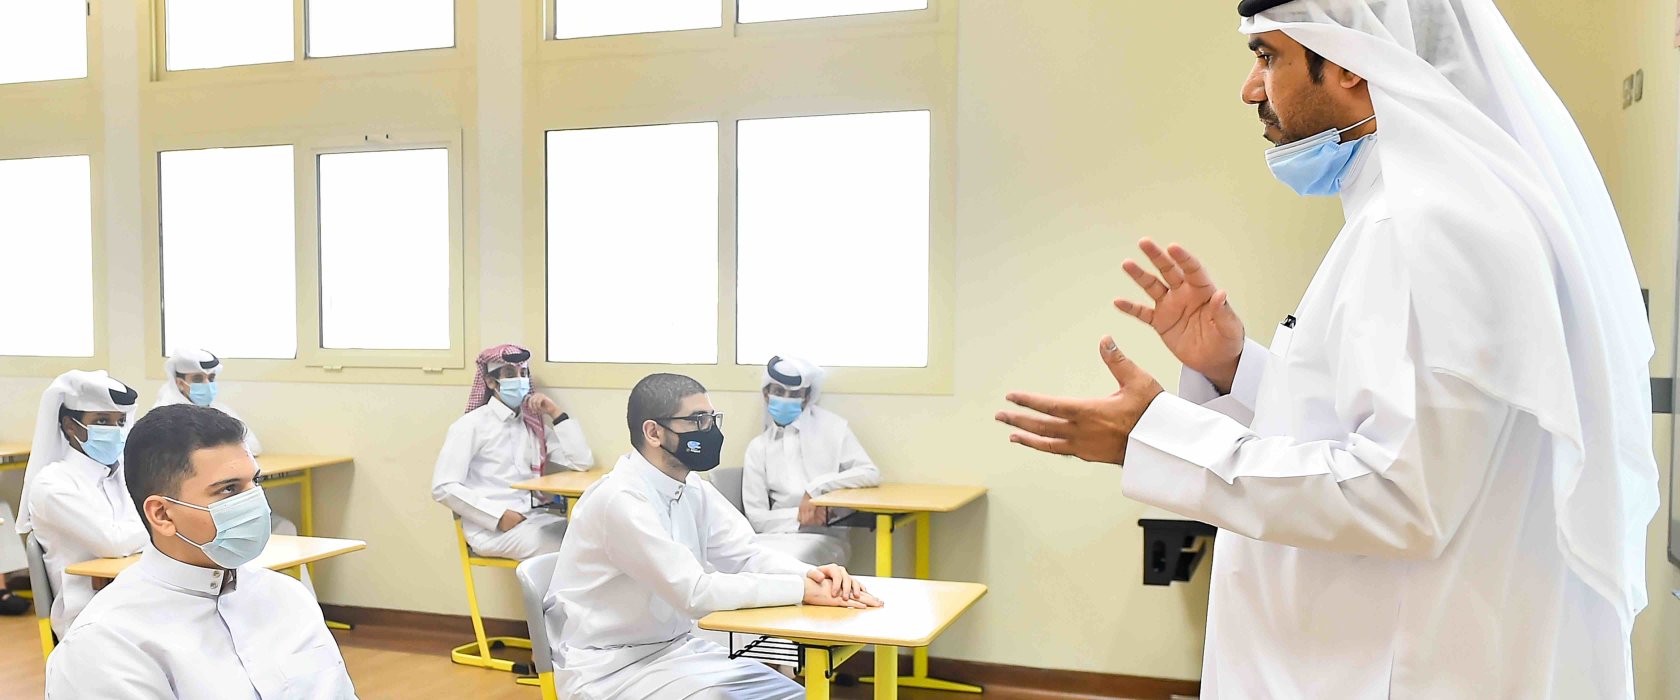 Qatari men need to become teachers to “build a better future together”